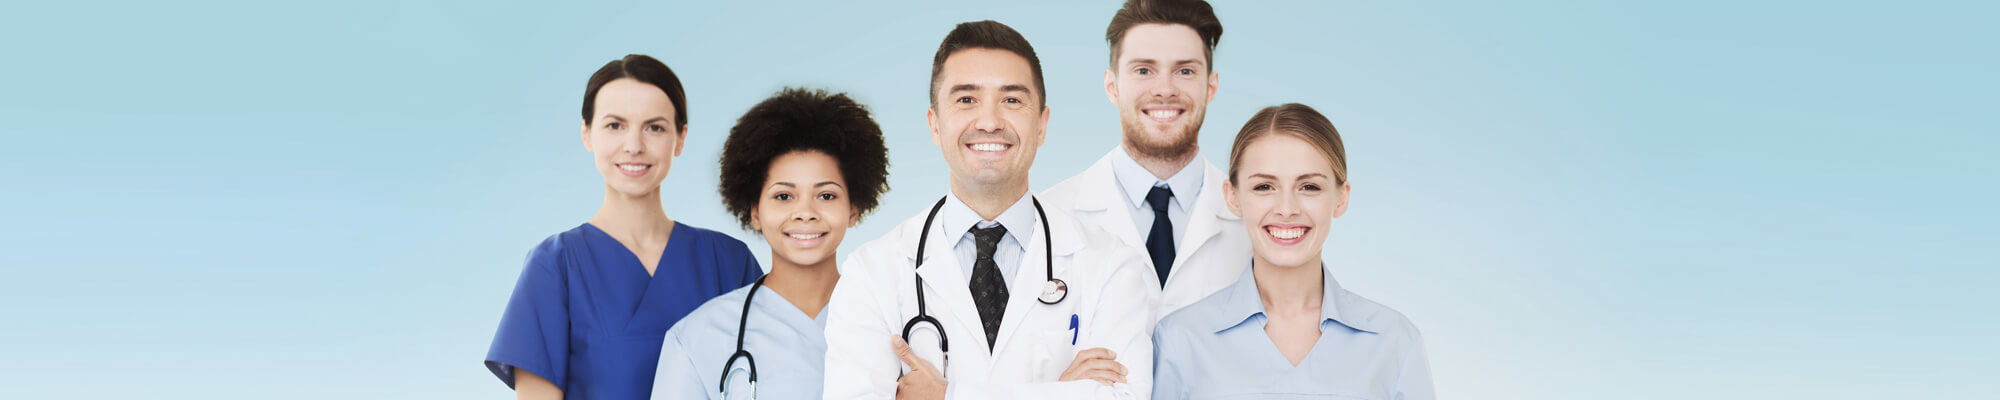 resumes for healthcare professionals and nurses